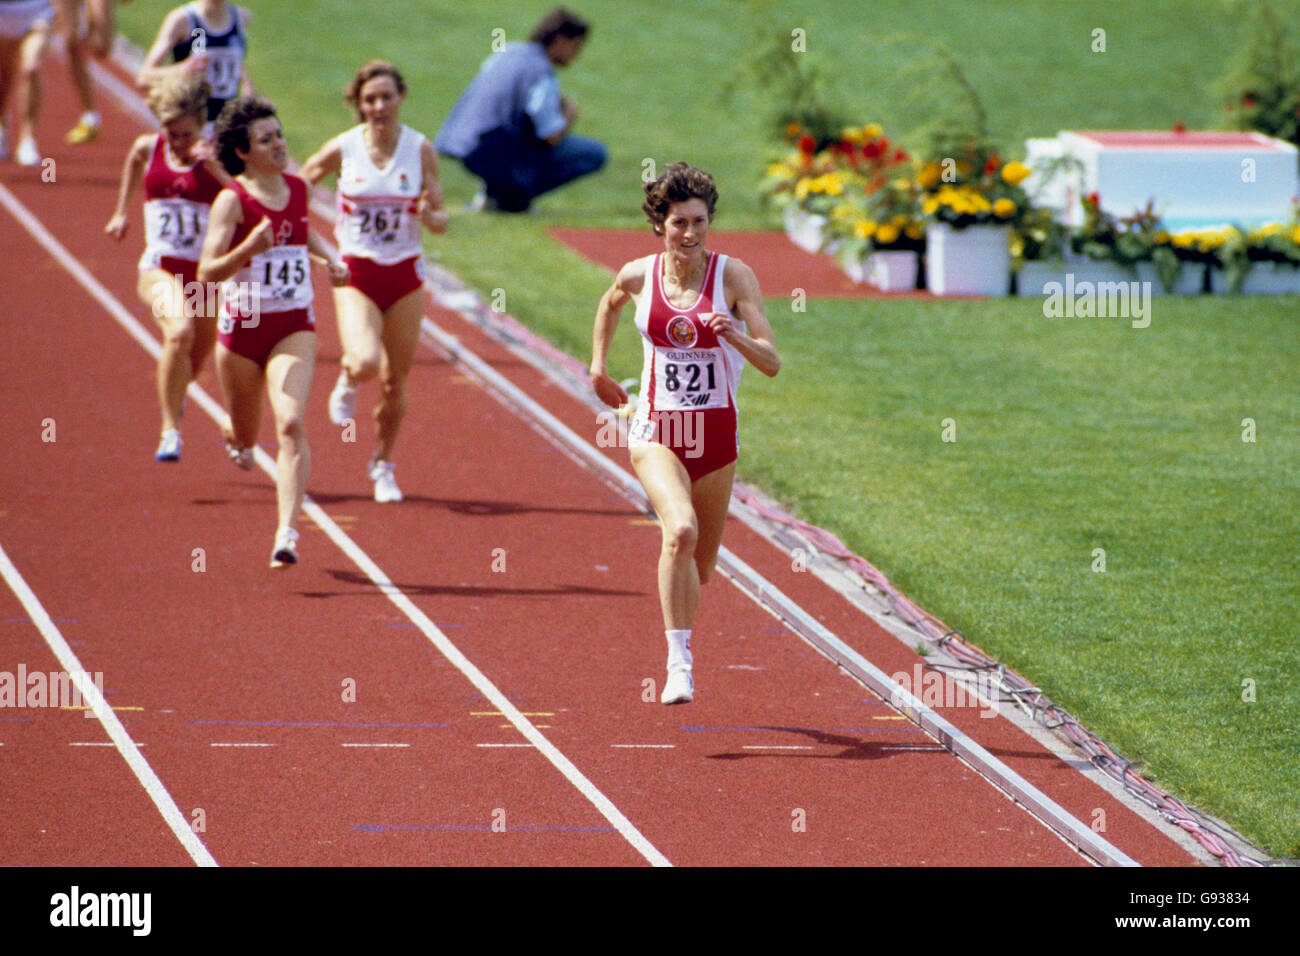 Wales's Kirsty Wade comes home to win gold in the women's 1500m from Canada's Debbie Bowker (145) Stock Photo